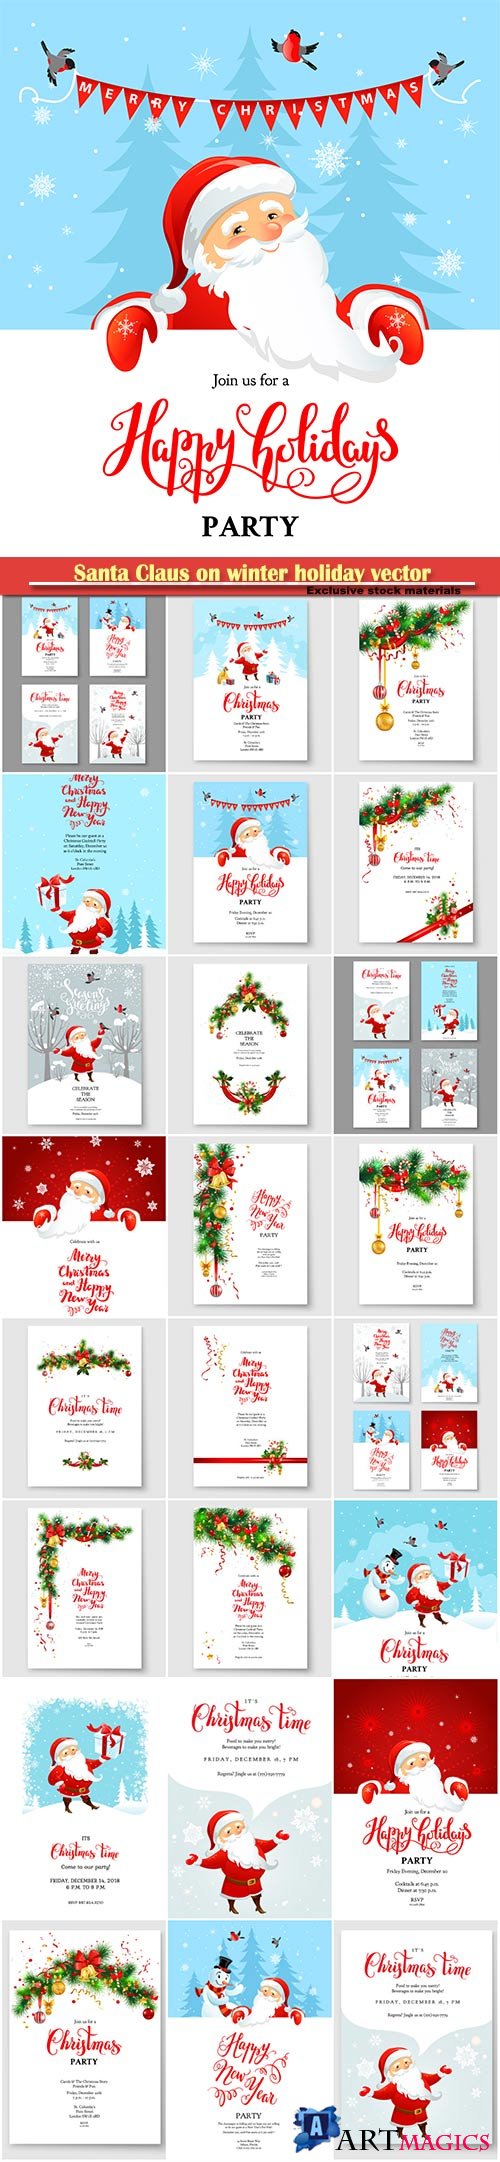 Santa Claus on winter holiday vector invitation, Christmas sample for banners, advertising, leaflet, cards